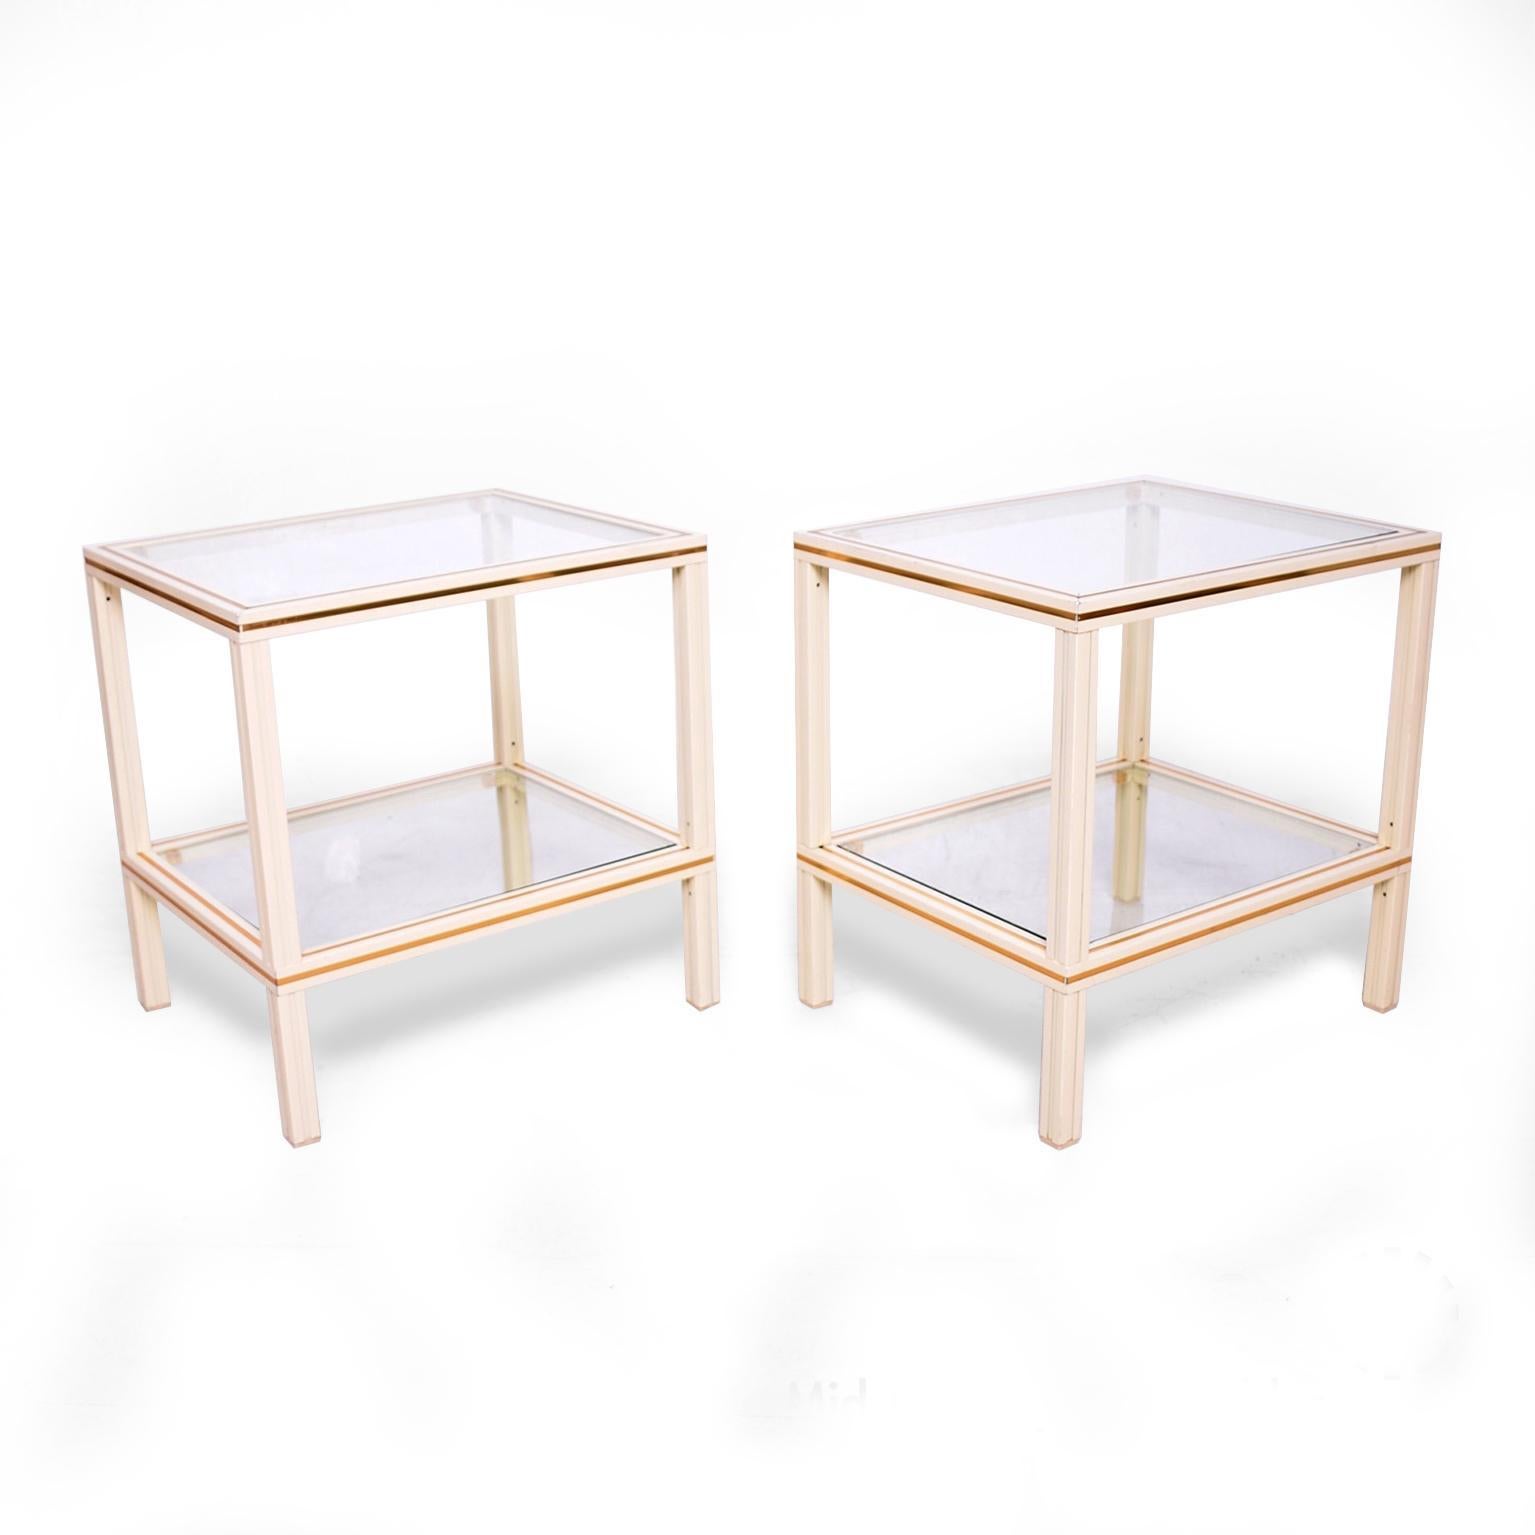 For your consideration: Pierre Vandel fabulous Trio Set includes Rectangular Coffee Table and 2 Side Tables Paris France 1970s
Made in Aluminum, Brass and Glass. 
Coffee table: 15.13 H x 41.5 L x 21.5D.
Side tables: 20.25H x 19.5 W x 16D.
Side